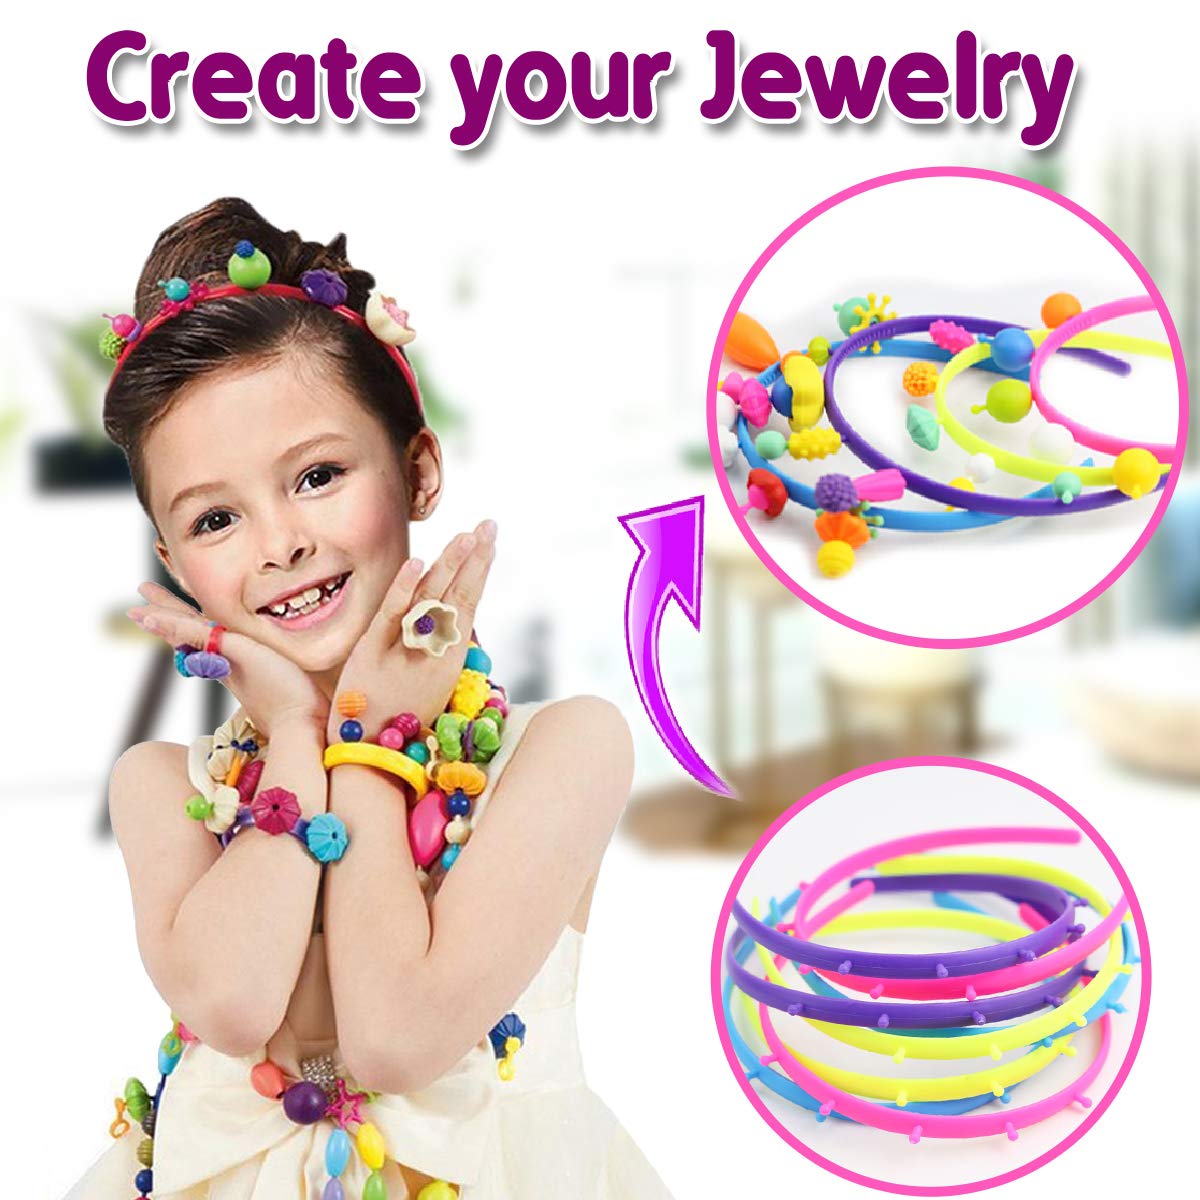 FUNZBO Snap Pop Beads for Girls Toys - Kids Jewelry Making Kit Pop-Bead Art and Craft Kits DIY Bracelets Necklace Hairband and Rings Toy for Age 3 4 5 6 7 8 Year Old Girl (Large)